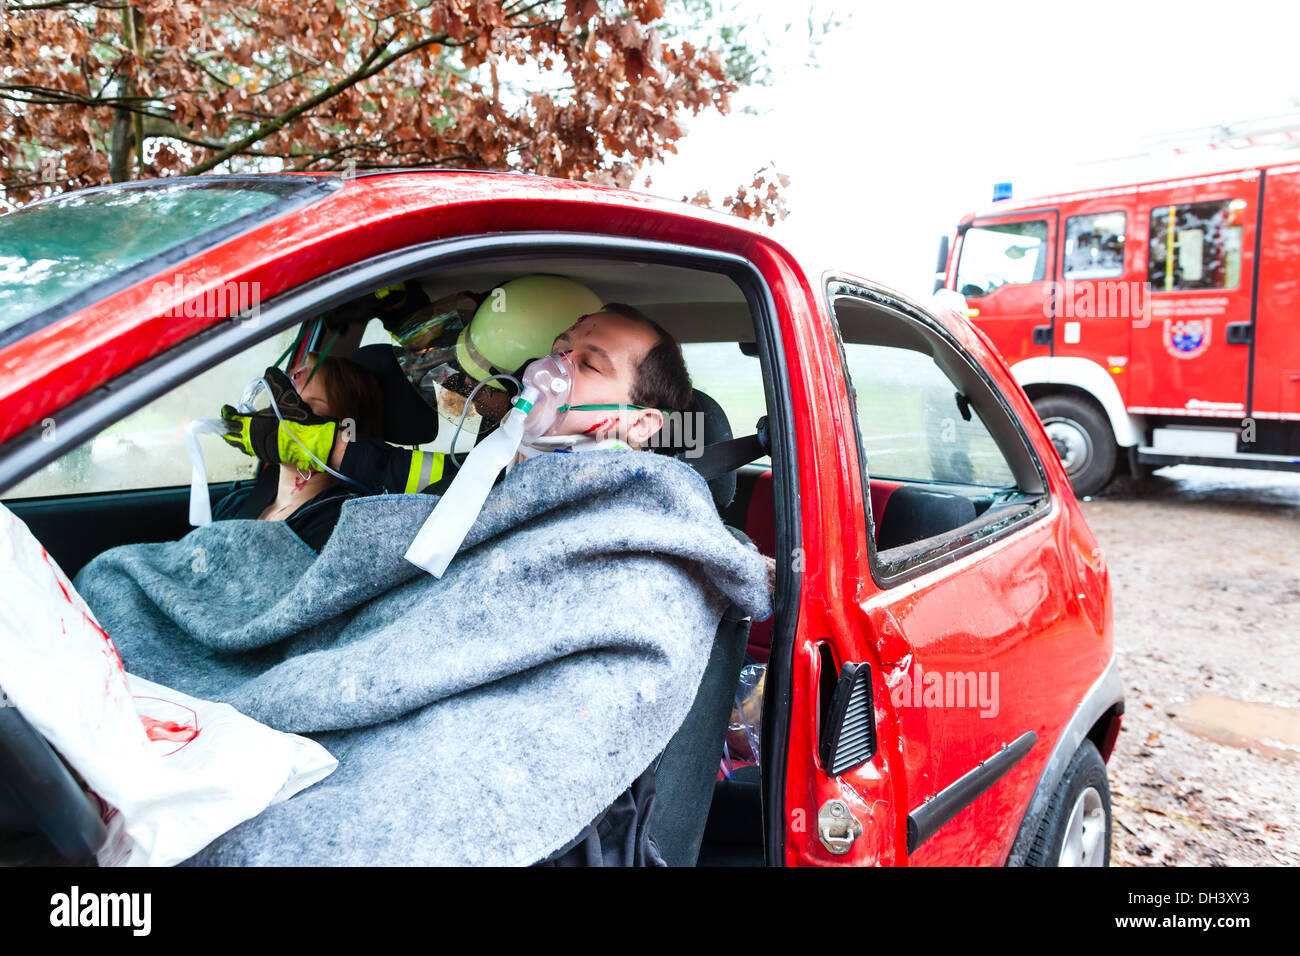 Accident - Fire brigade rescues accident Victim of a car using a hydraulic rescue tool Stock Photo